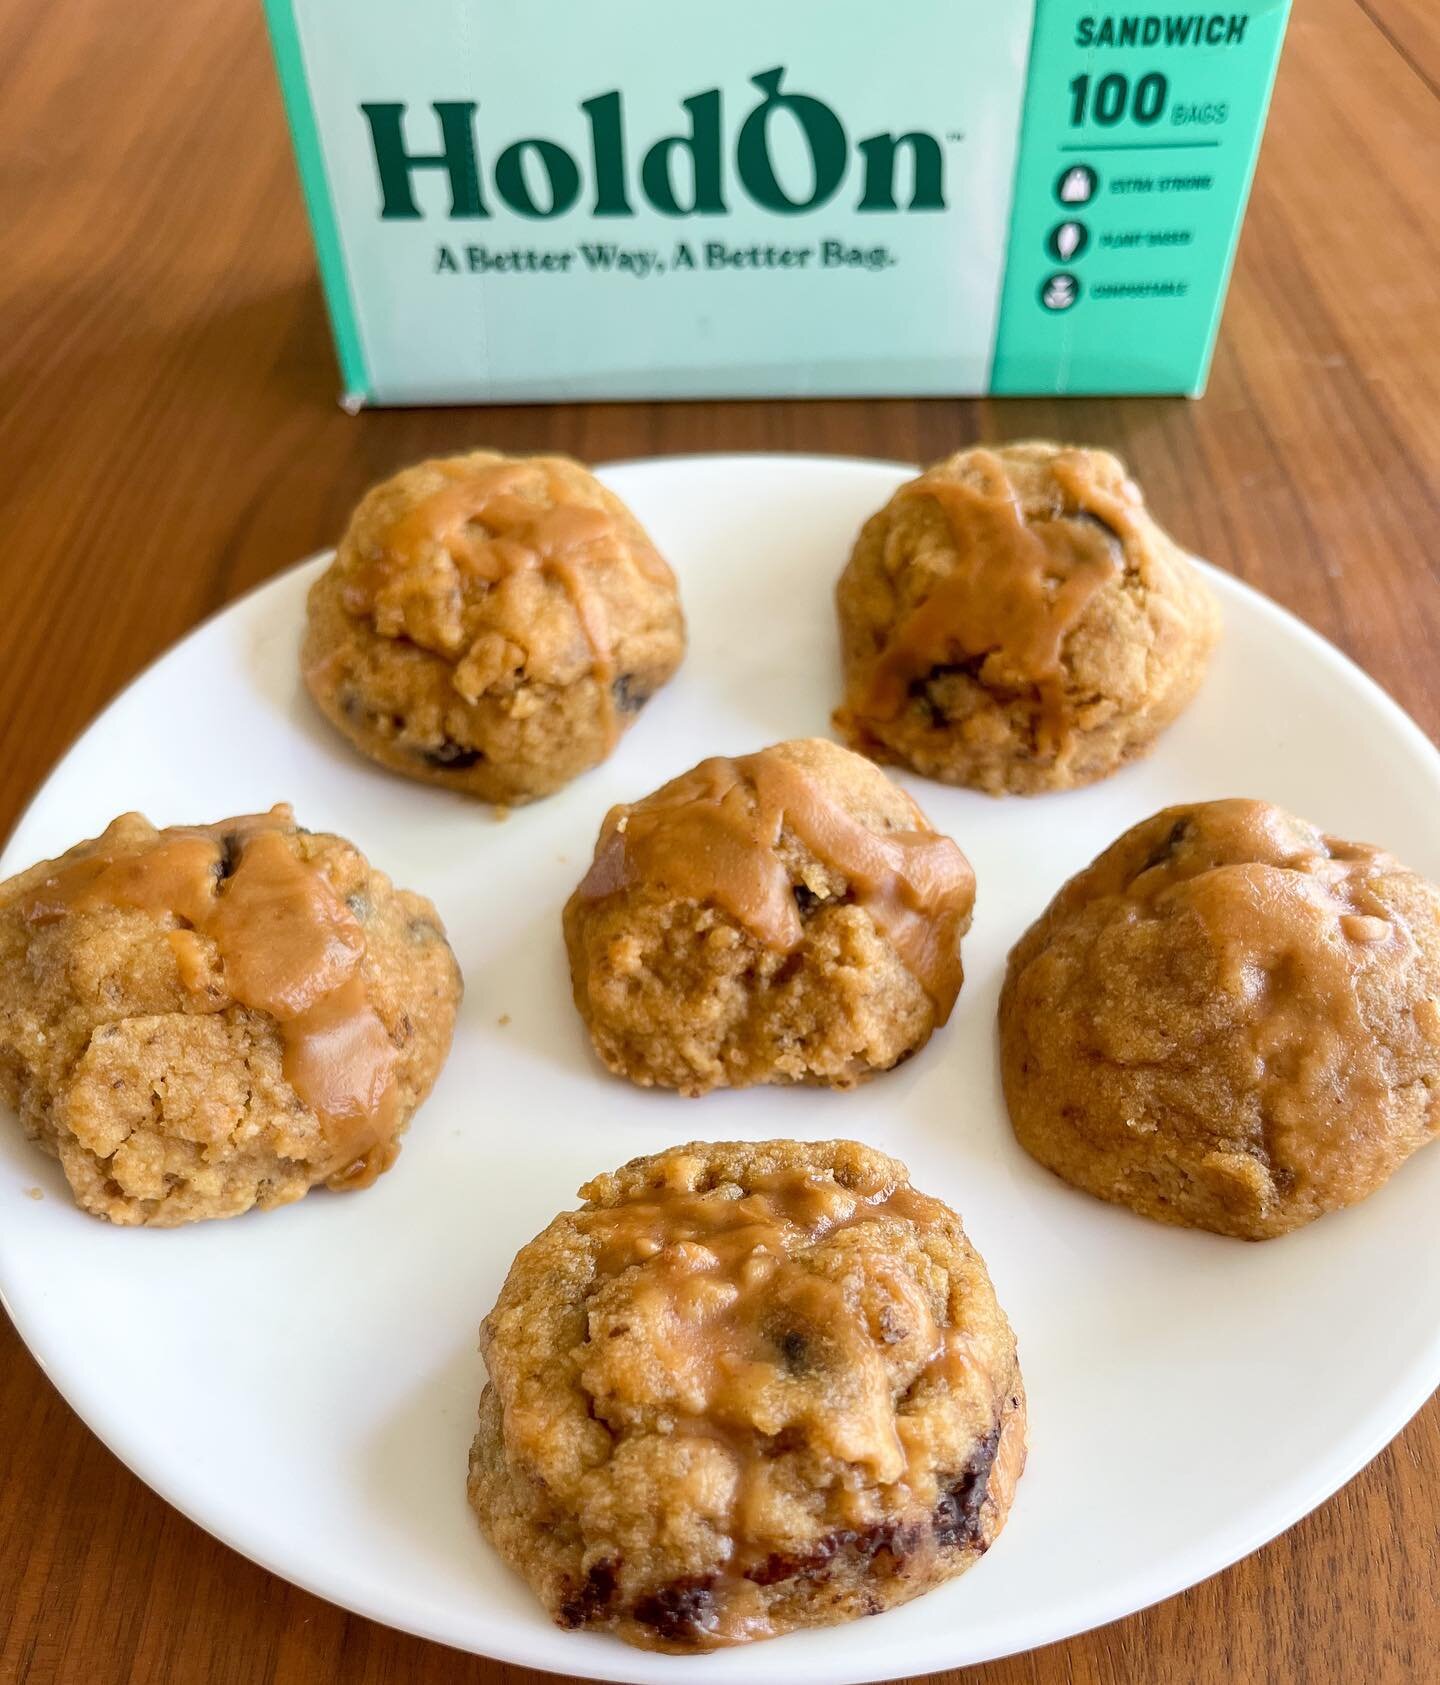 Looking for a sustainable way to take your SFG cookies on the go?! You&rsquo;ve come to the right place ♻️

Hosting a DOUBLE GIVEAWAY with @holdonbags and choosing two lucky winners to receive a set of nontoxic, BPA free, compostable, and plant based